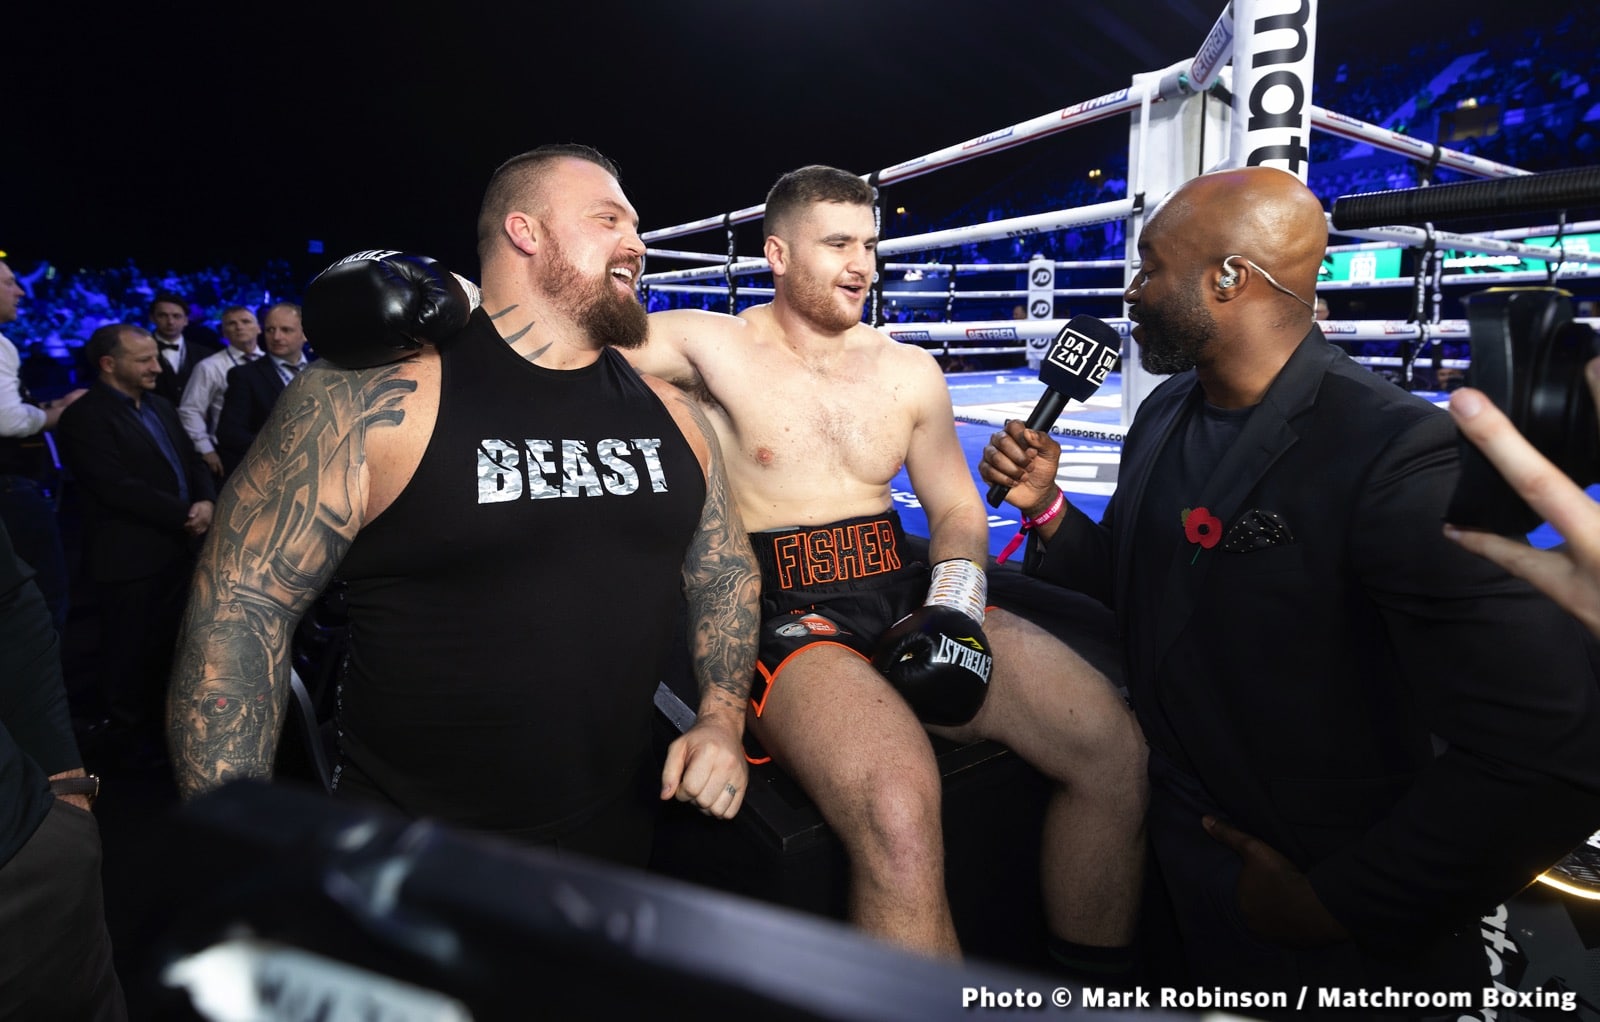 Johnny Fisher Blasts Through Musil To Go To 7-0 - Boxing Results